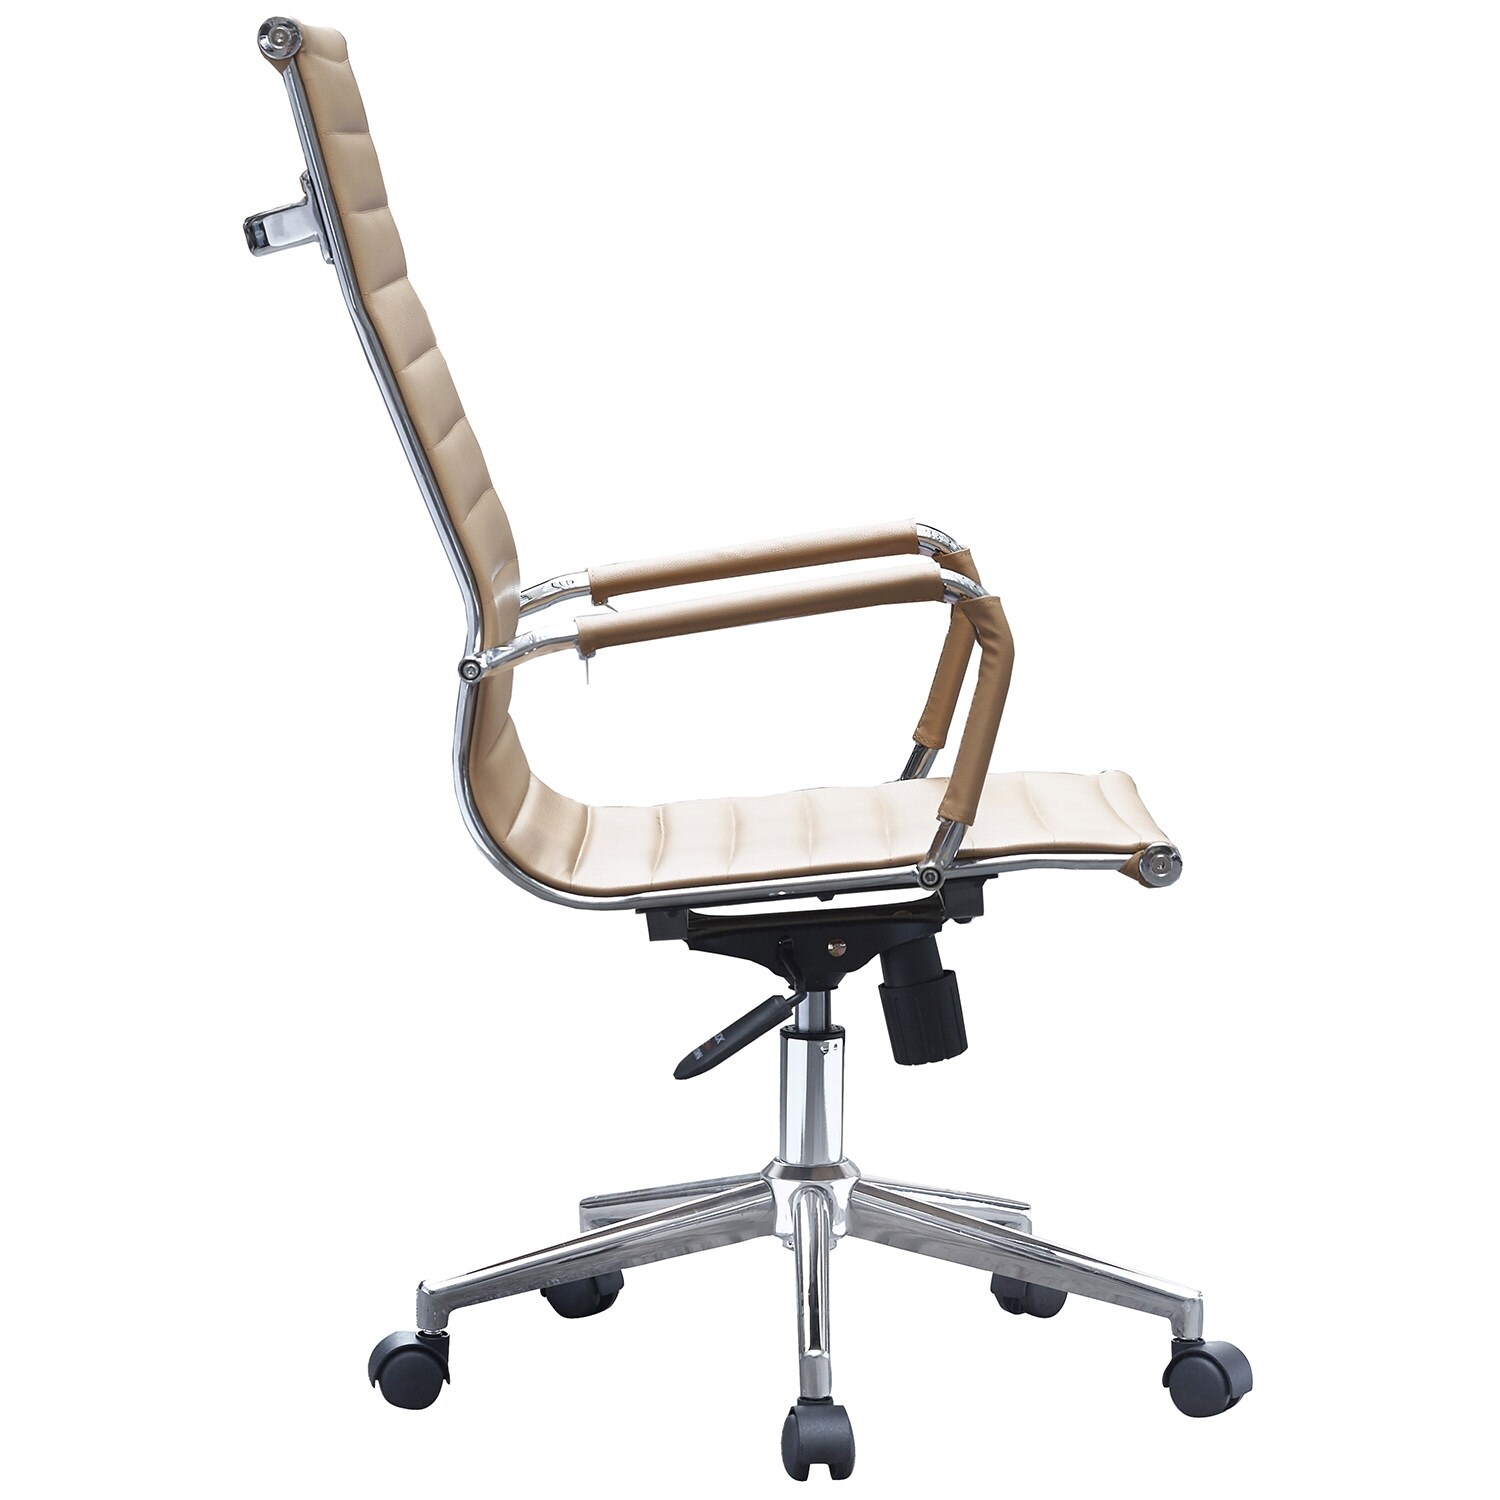 https://ak1.ostkcdn.com/images/products/is/images/direct/300001cb9297385ee9754ab7f7e685db1380d46b/Modern-High-Back-Office-Chair-Ribbed-PU-Leather-Tilt-Adjustable-Conference-Room-Home.jpg